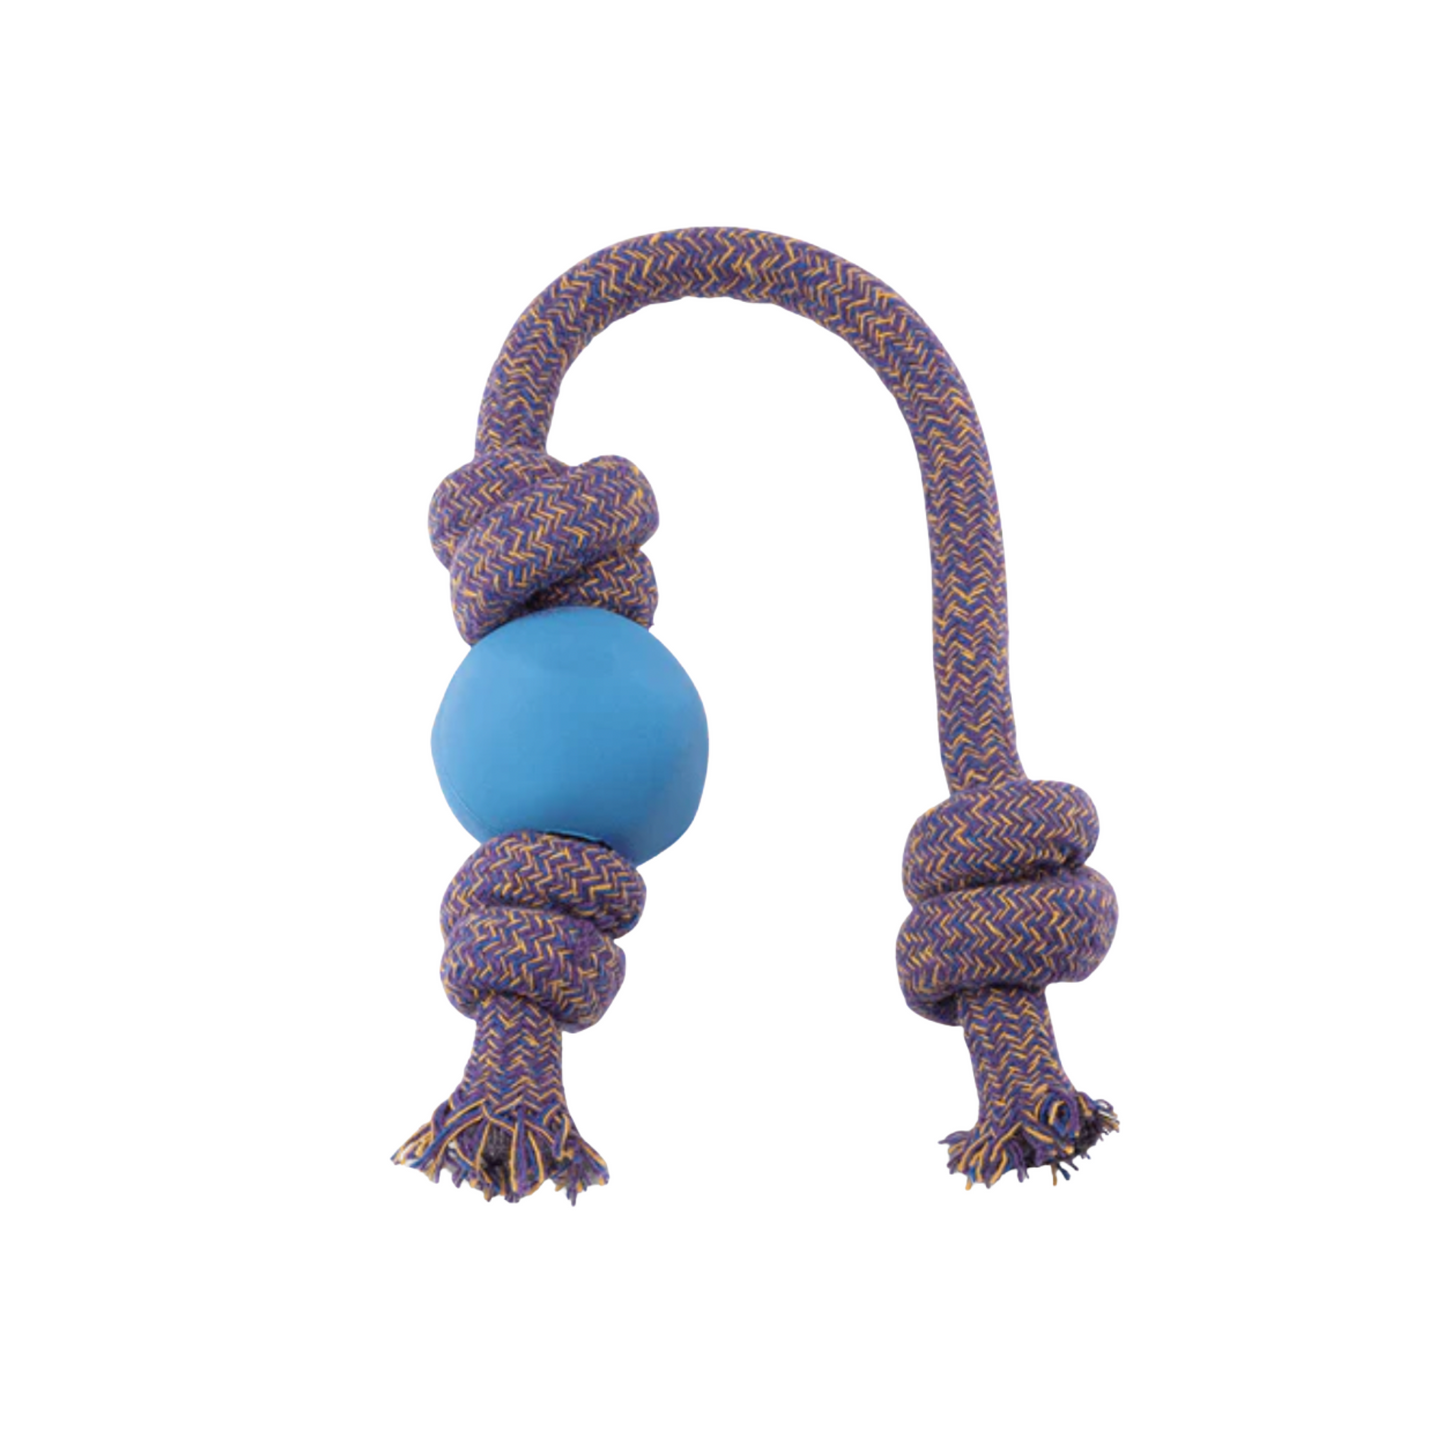 Beco Natural Rubber Ball on Rope Tug Toy Small & Large Blue, Pink, Green